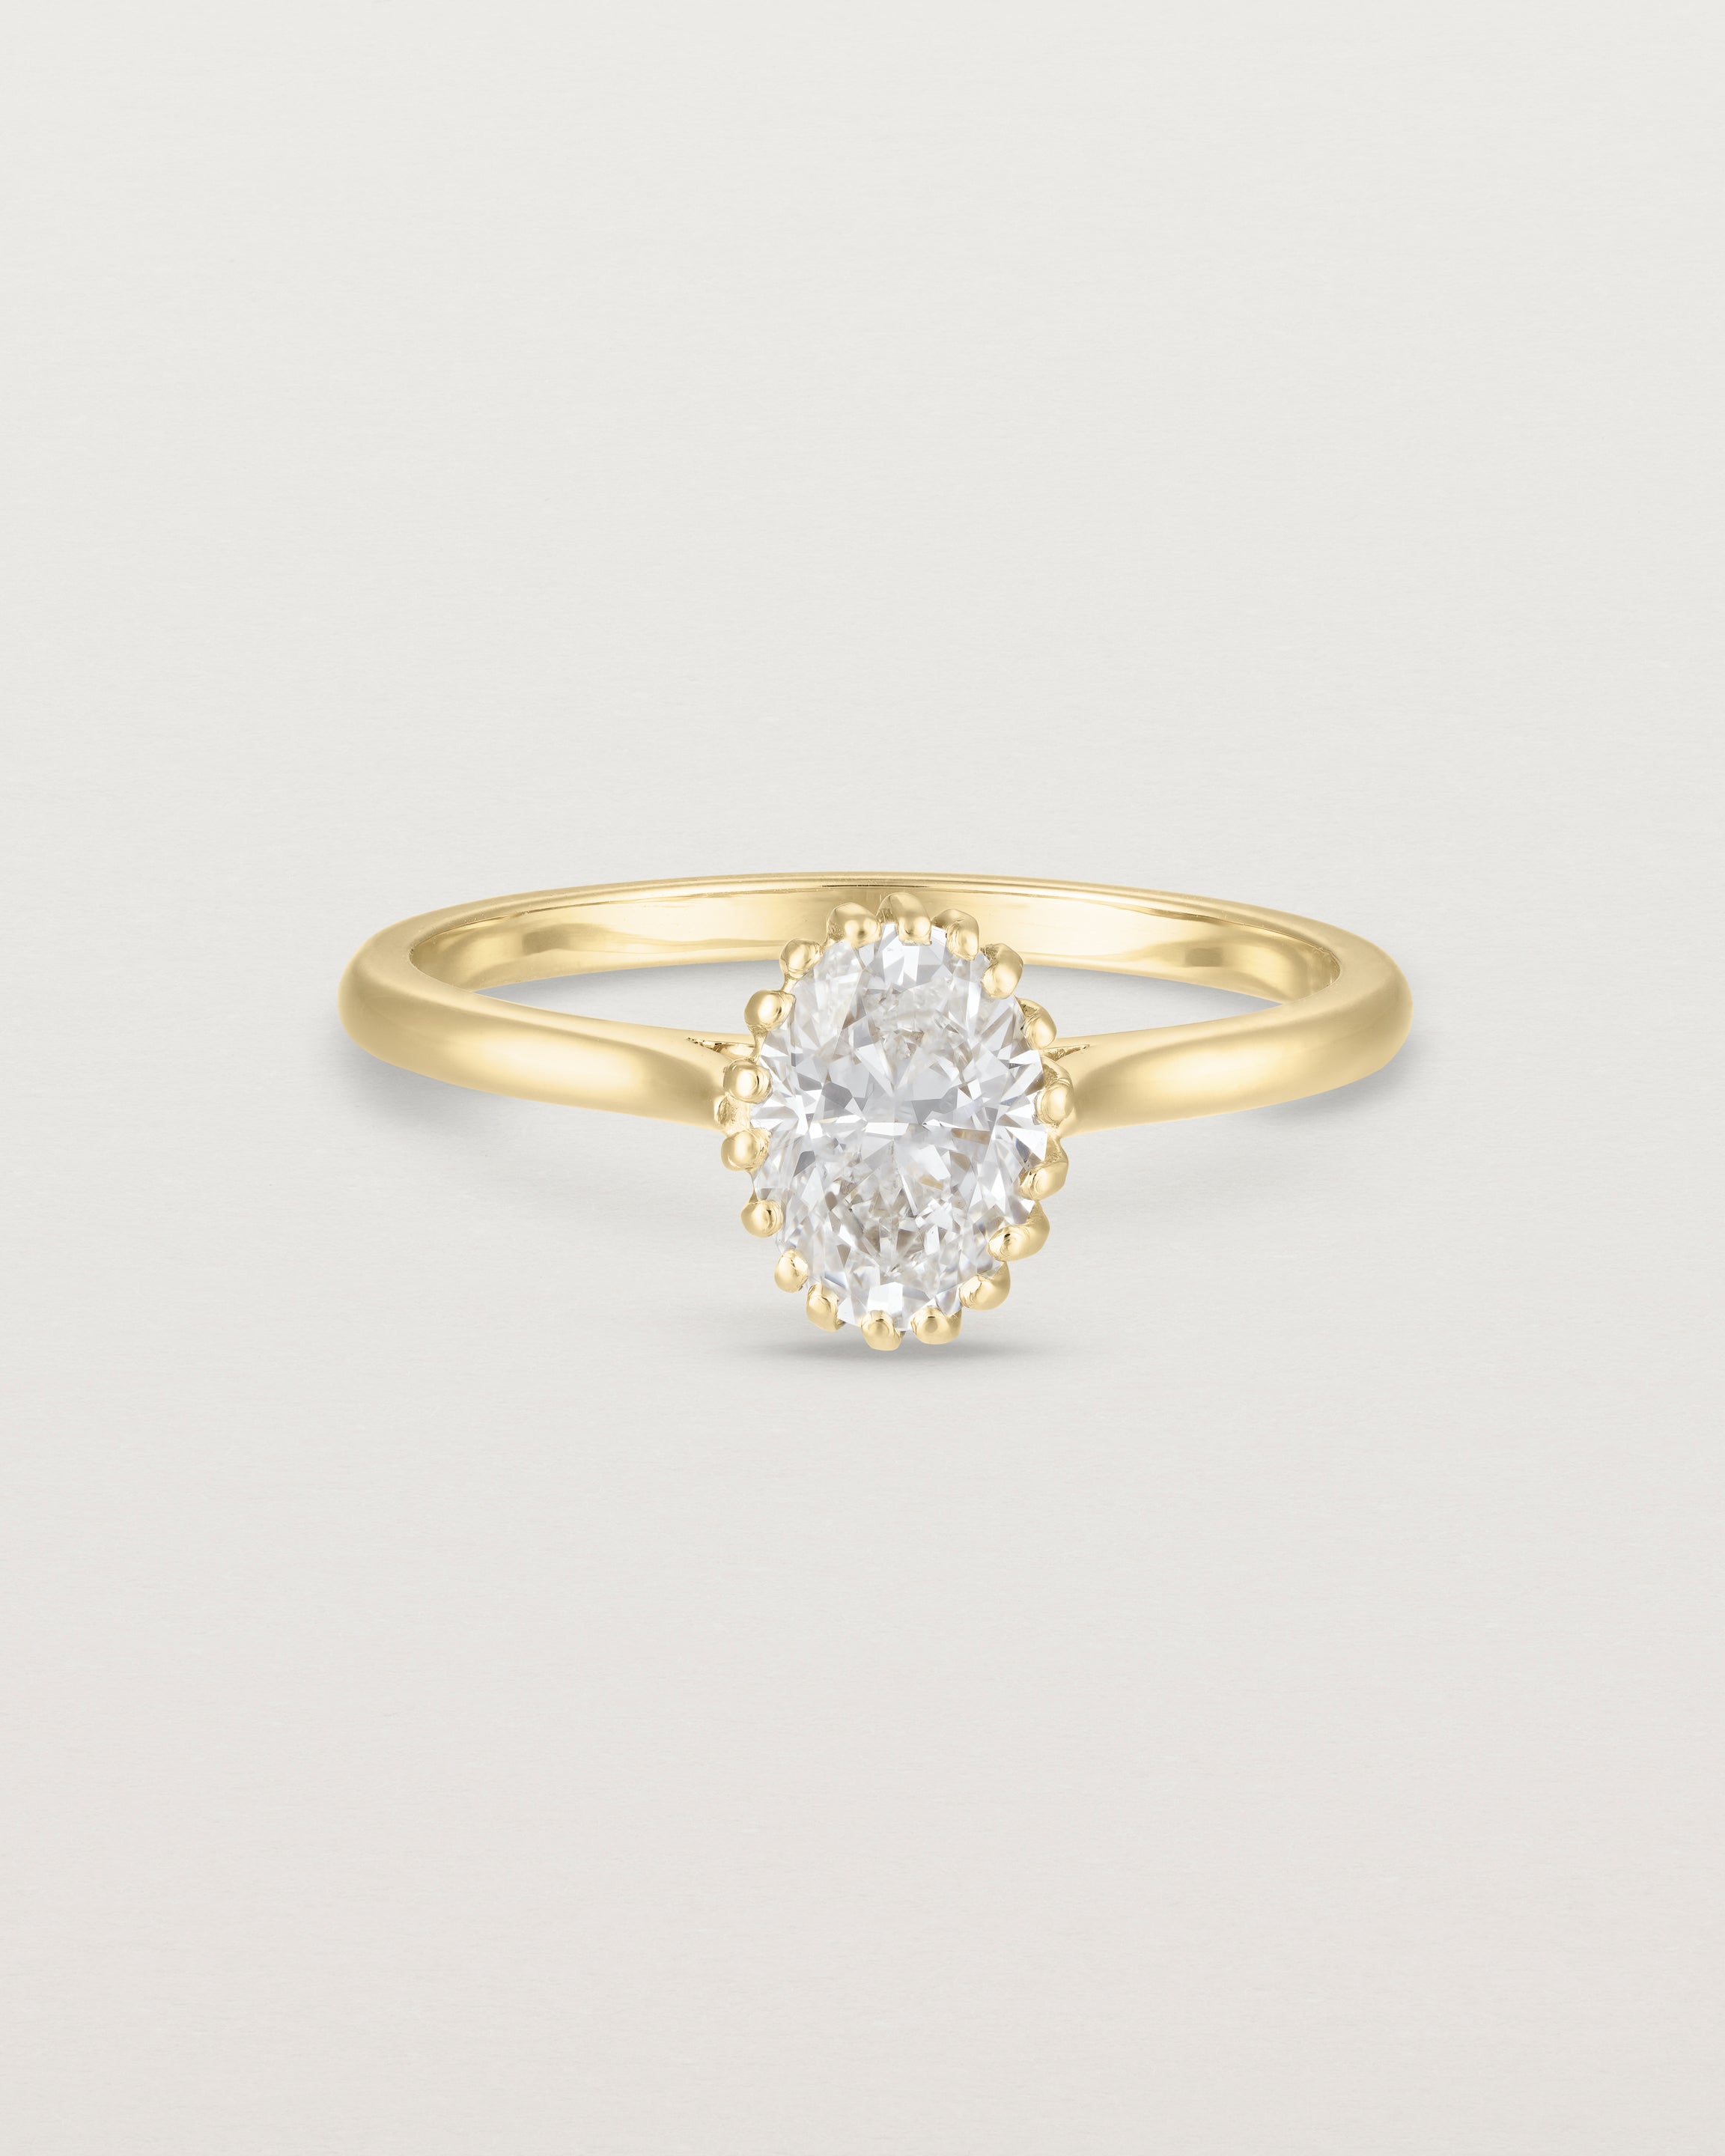 Front view of the Meroë Oval Solitaire | Laboratory Grown Diamond in yellow gold.